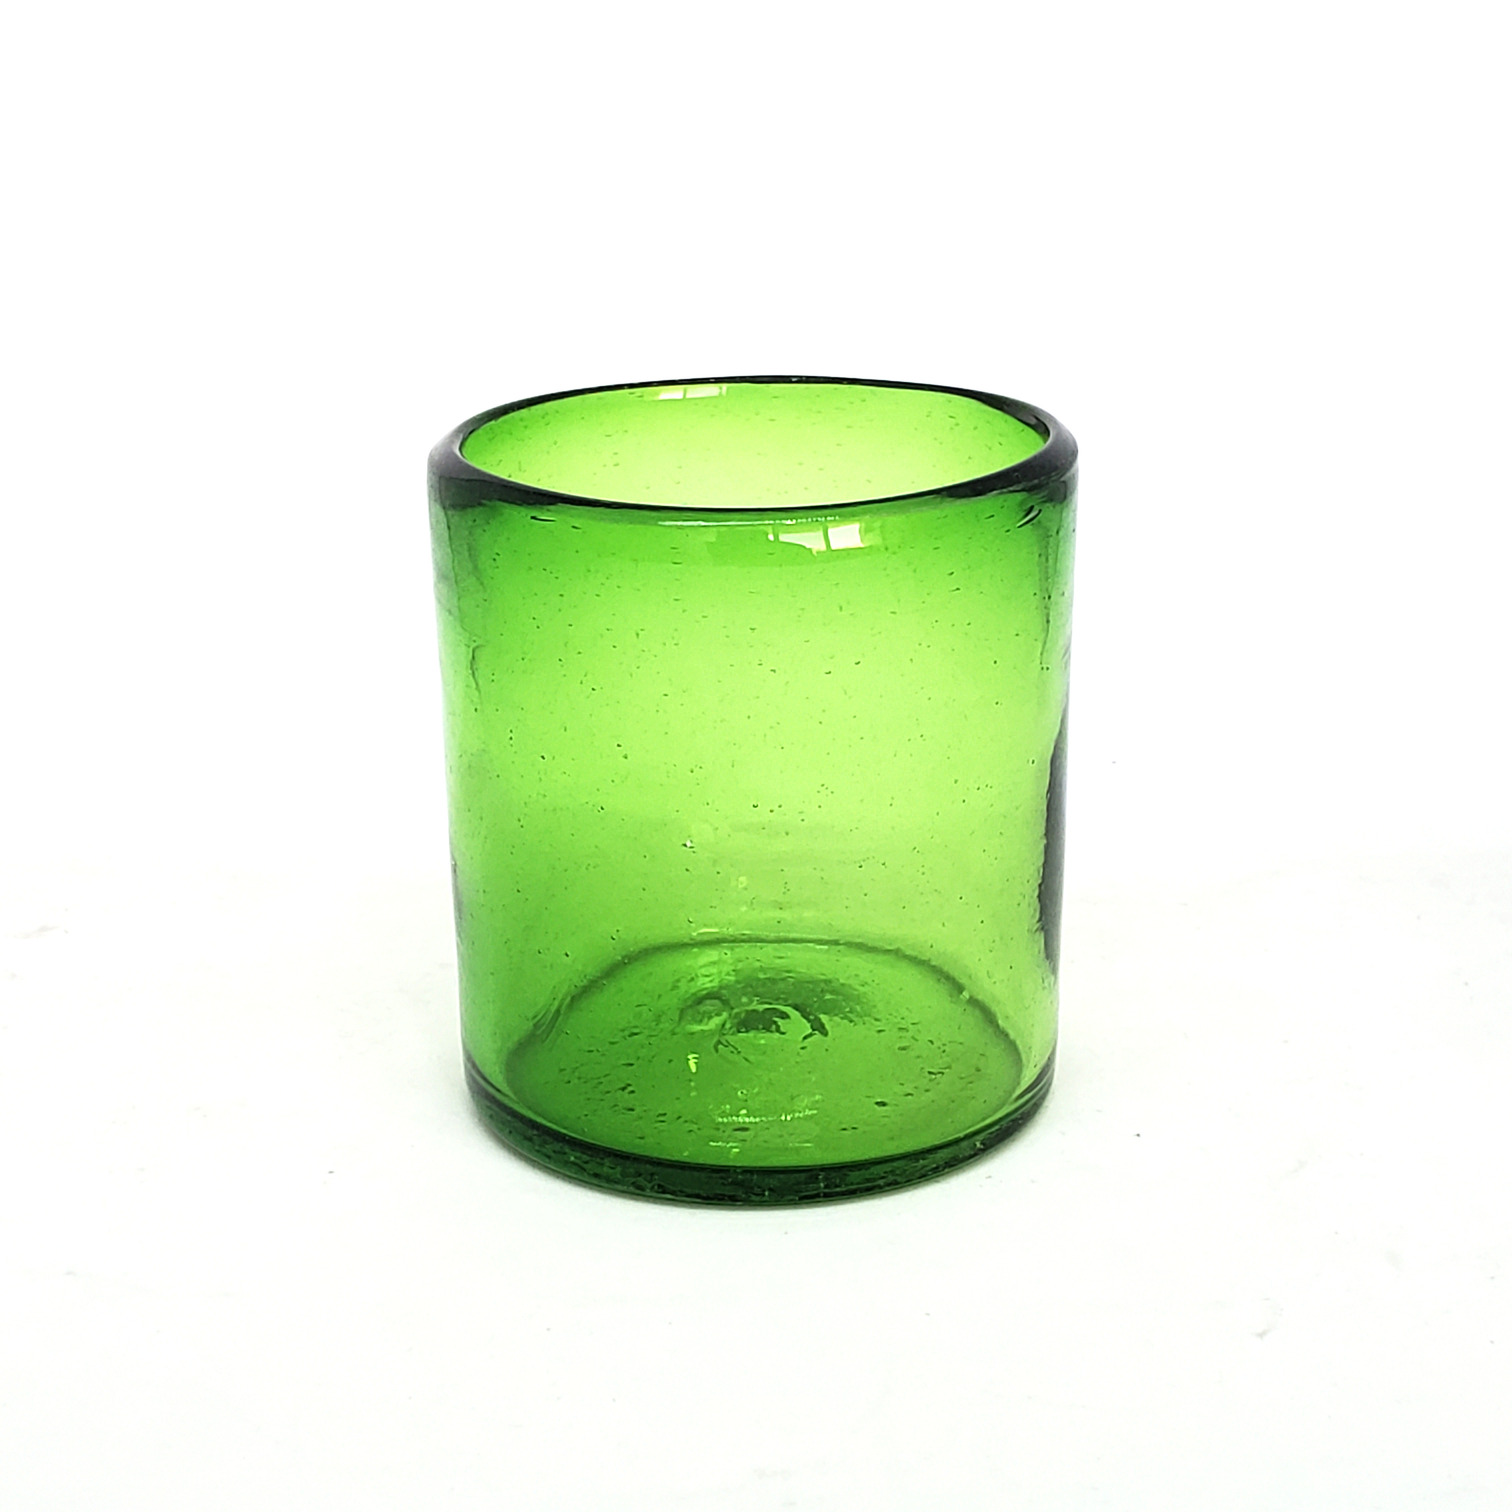 Wholesale Mexican Glasses / Solid Emerald Green 9 oz Short Tumblers  / Enhance your favorite drink with these colorful handcrafted glasses.